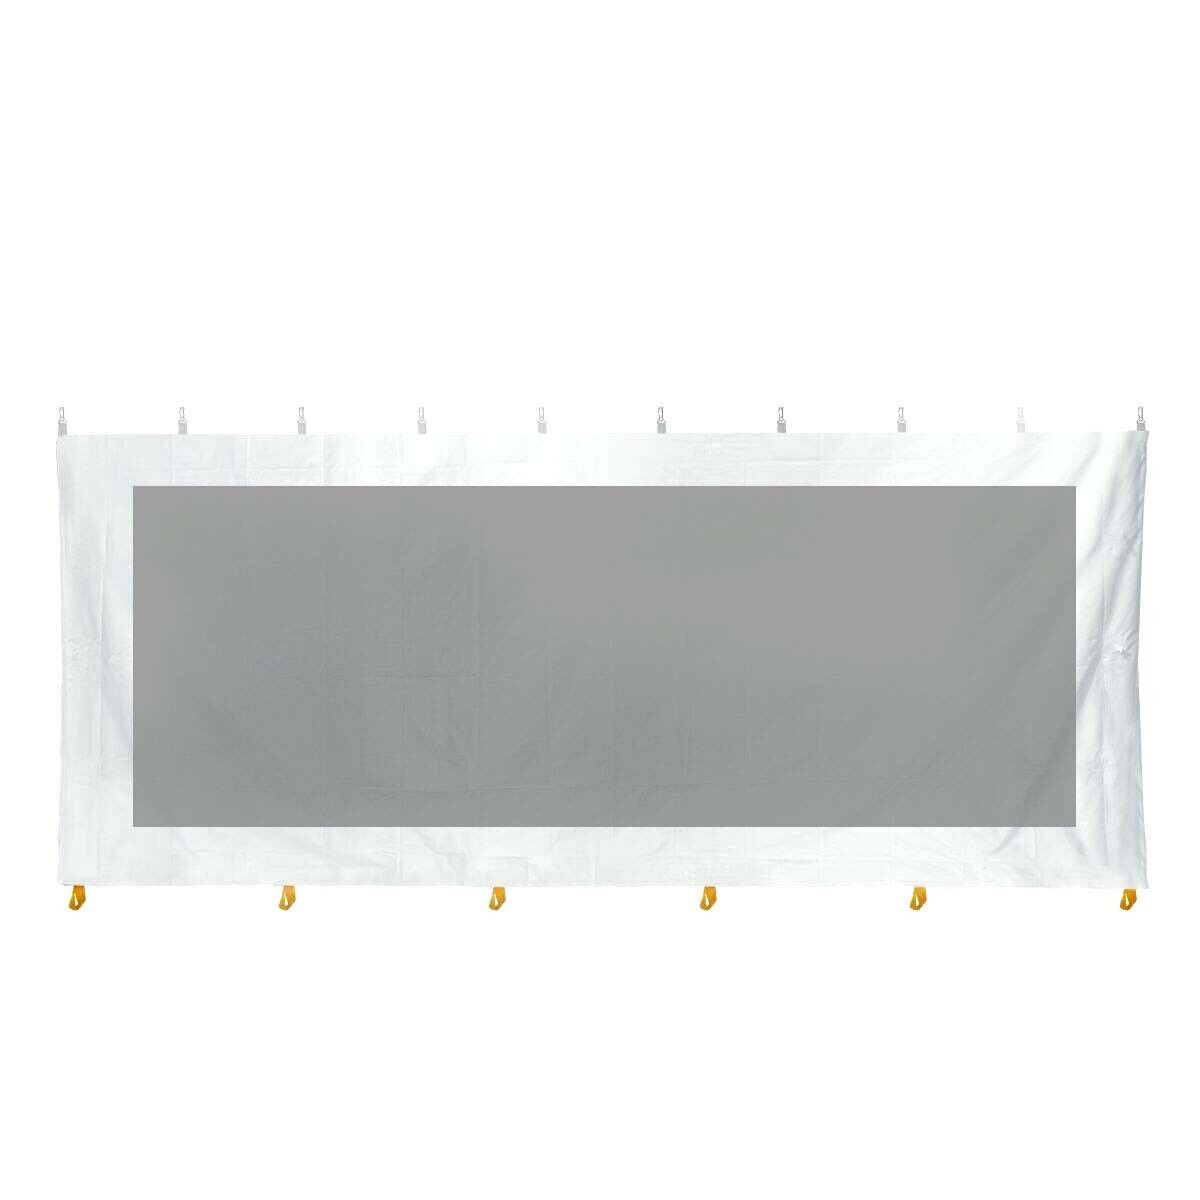 7x20 Standard Clear Sidewall for Canopy Event Tent Waterproof 14 oz Vinyl Panel